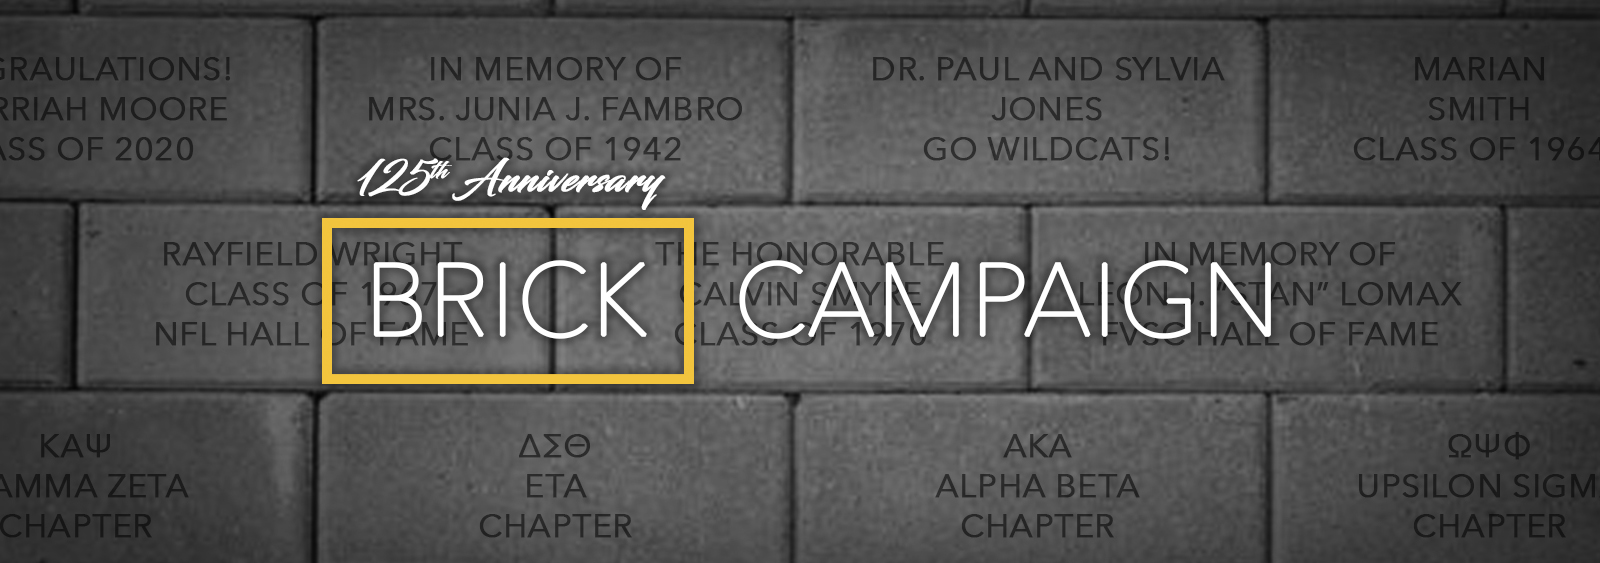 Fort Valley State University 125th Anniversary Brick Campaign